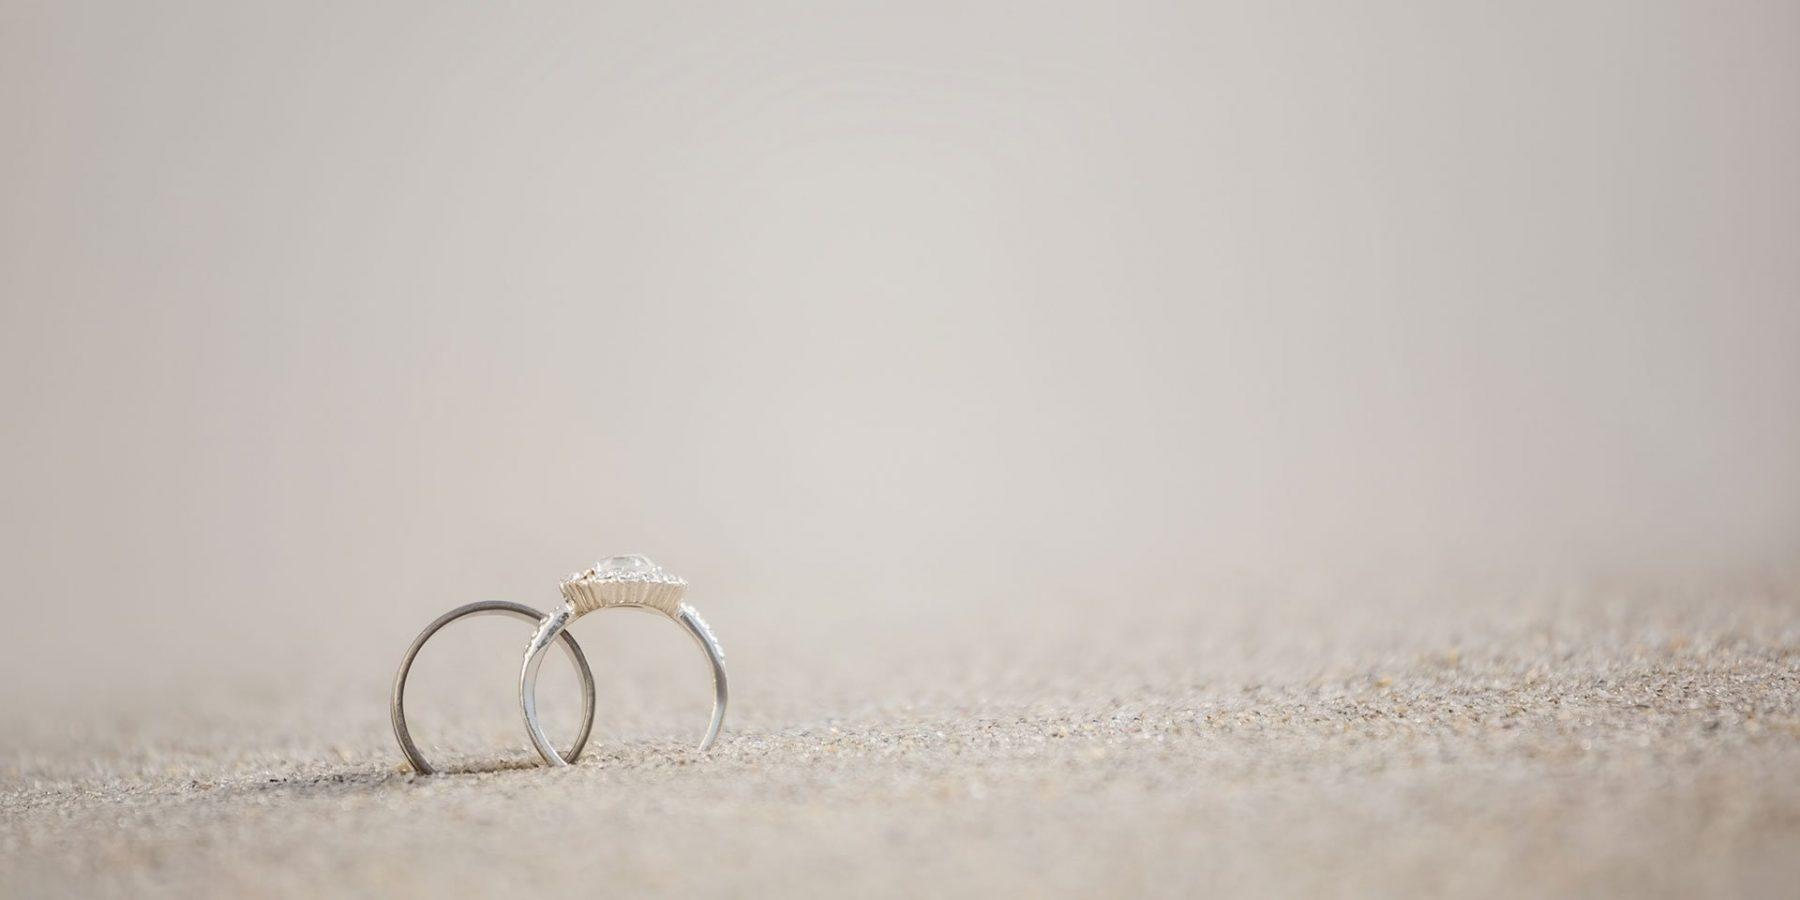 Two wedding rings in the sand